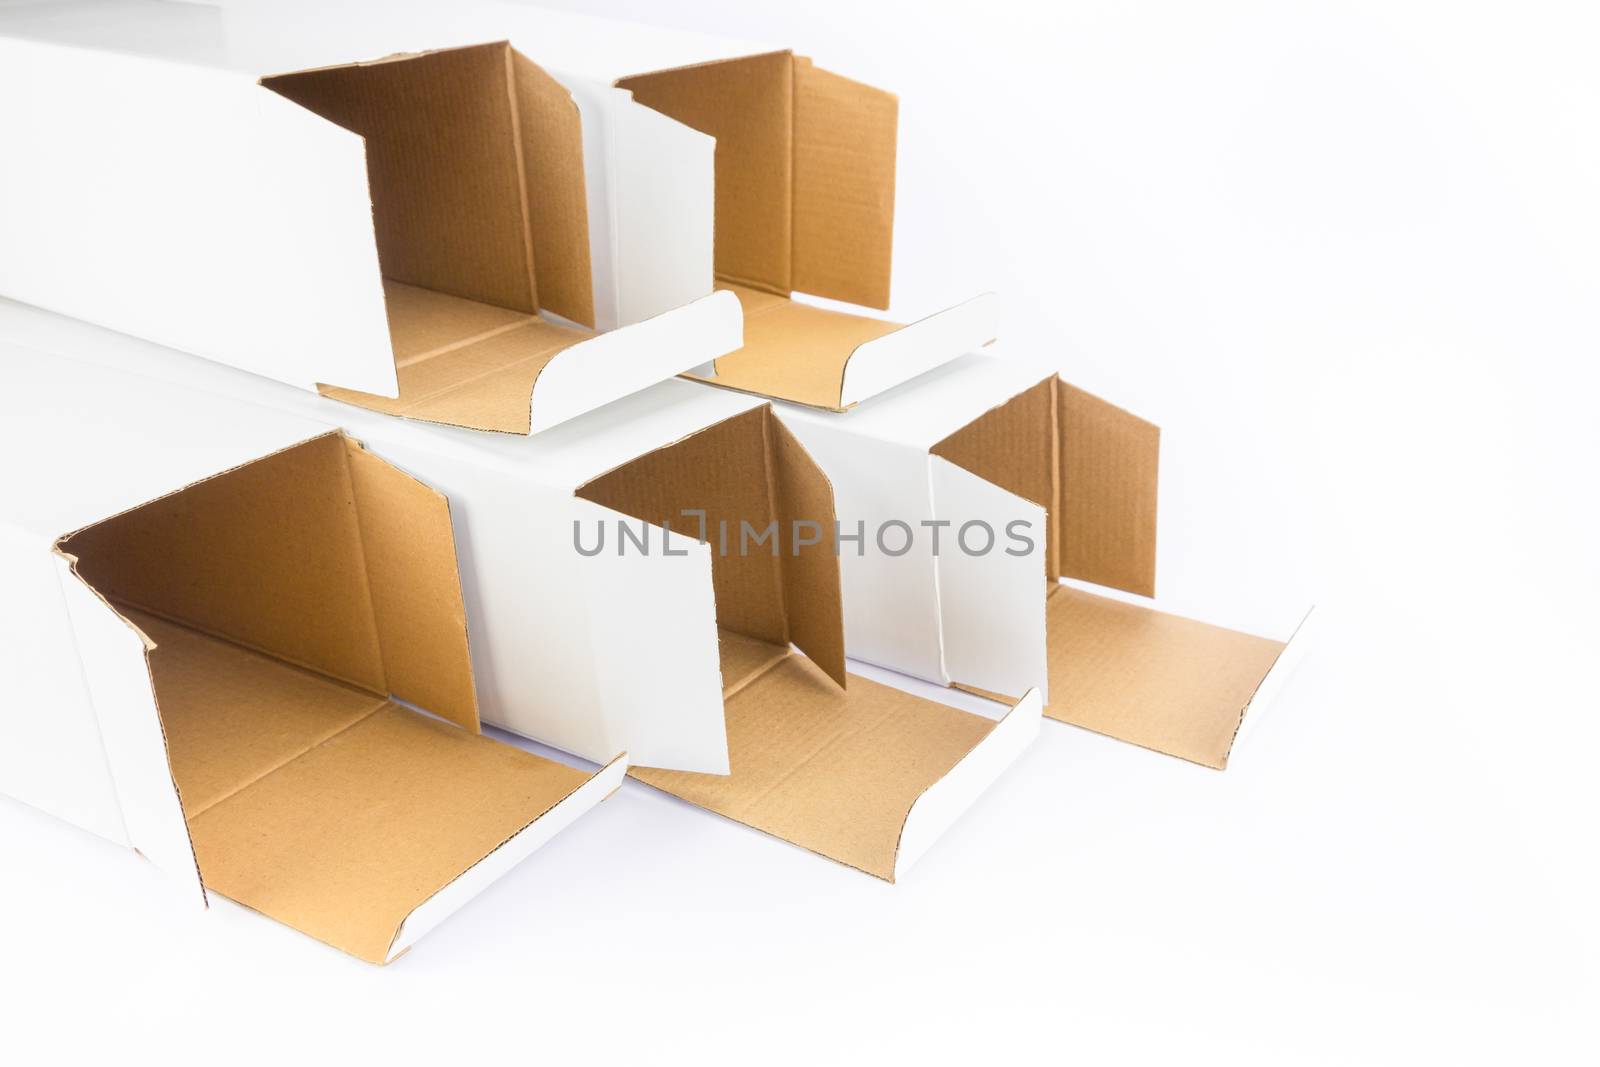 Several cartboard boxes as group together by BenSchonewille